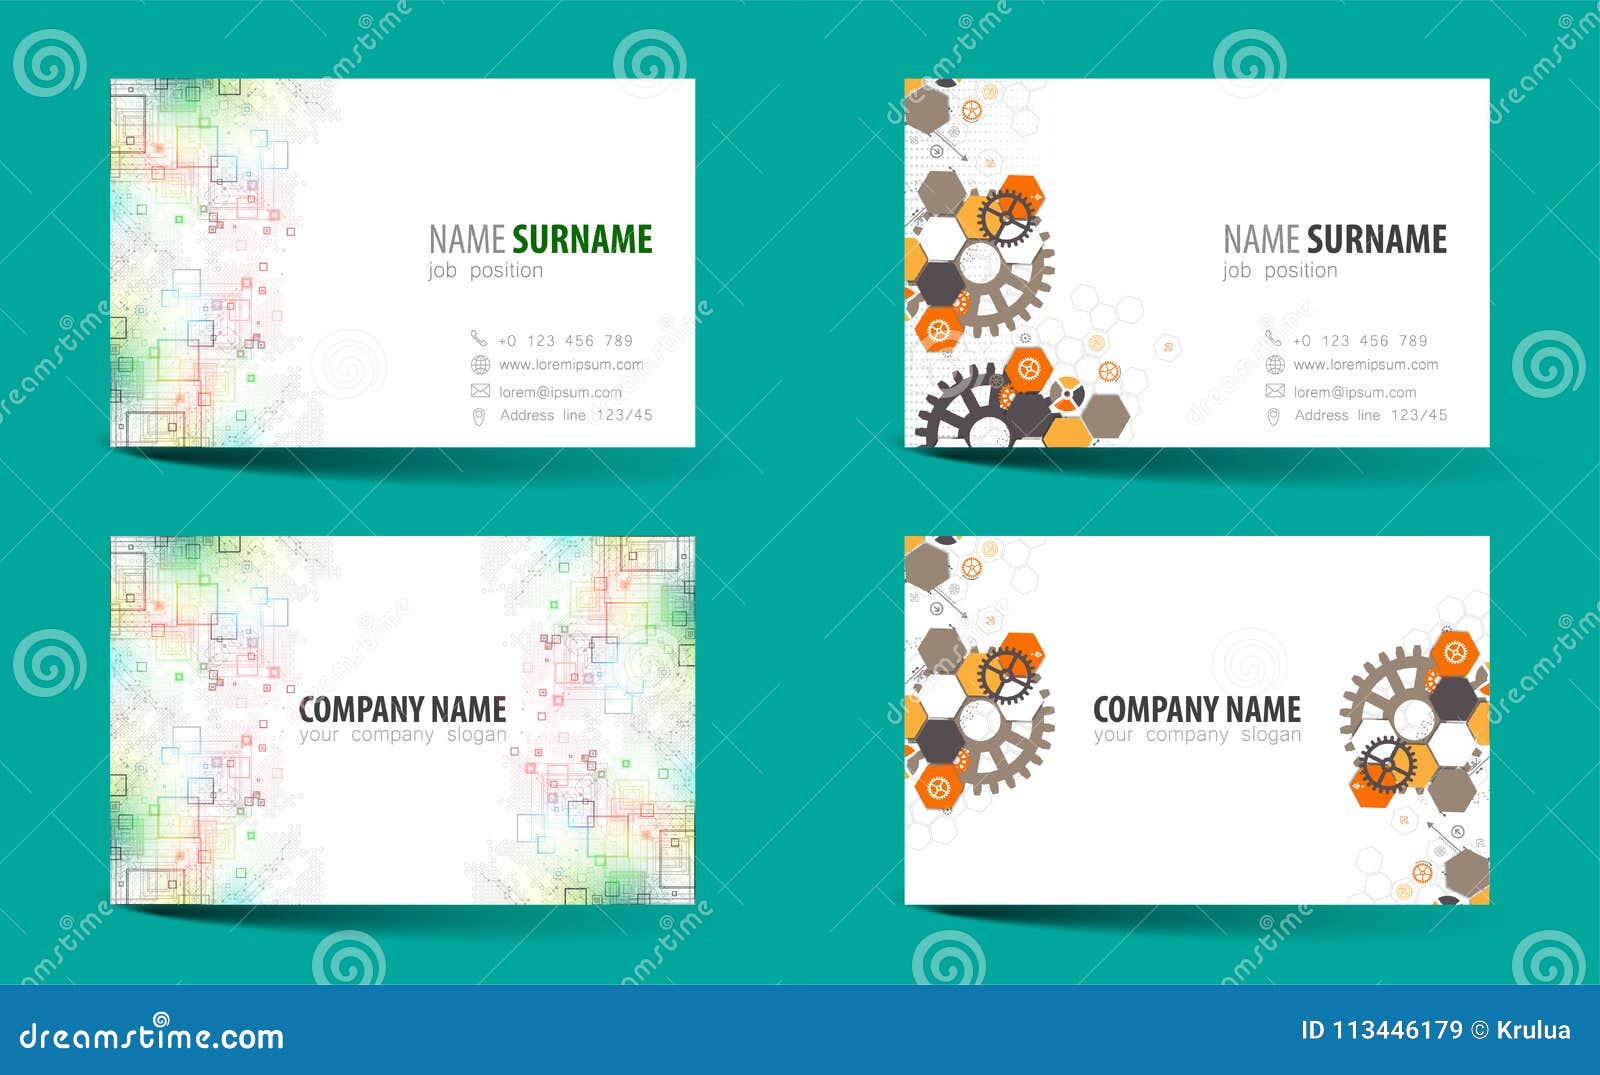 Two Sided Business Card Template from thumbs.dreamstime.com